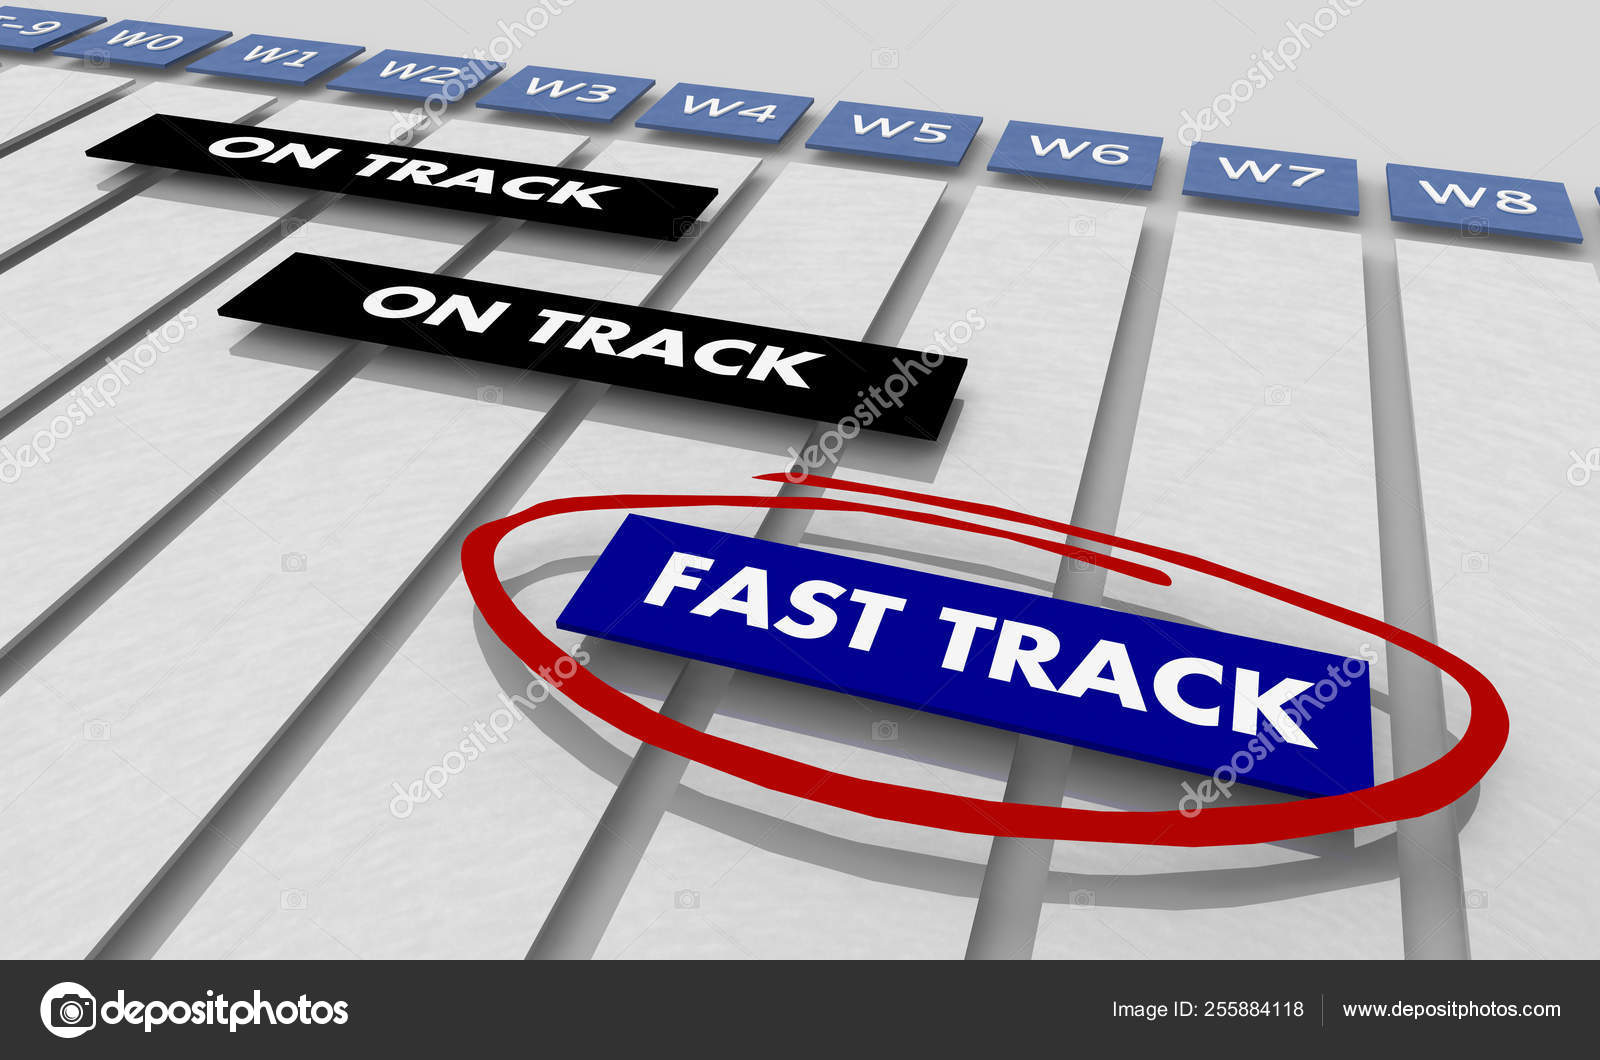 Fast Track Project - Fast Track Project